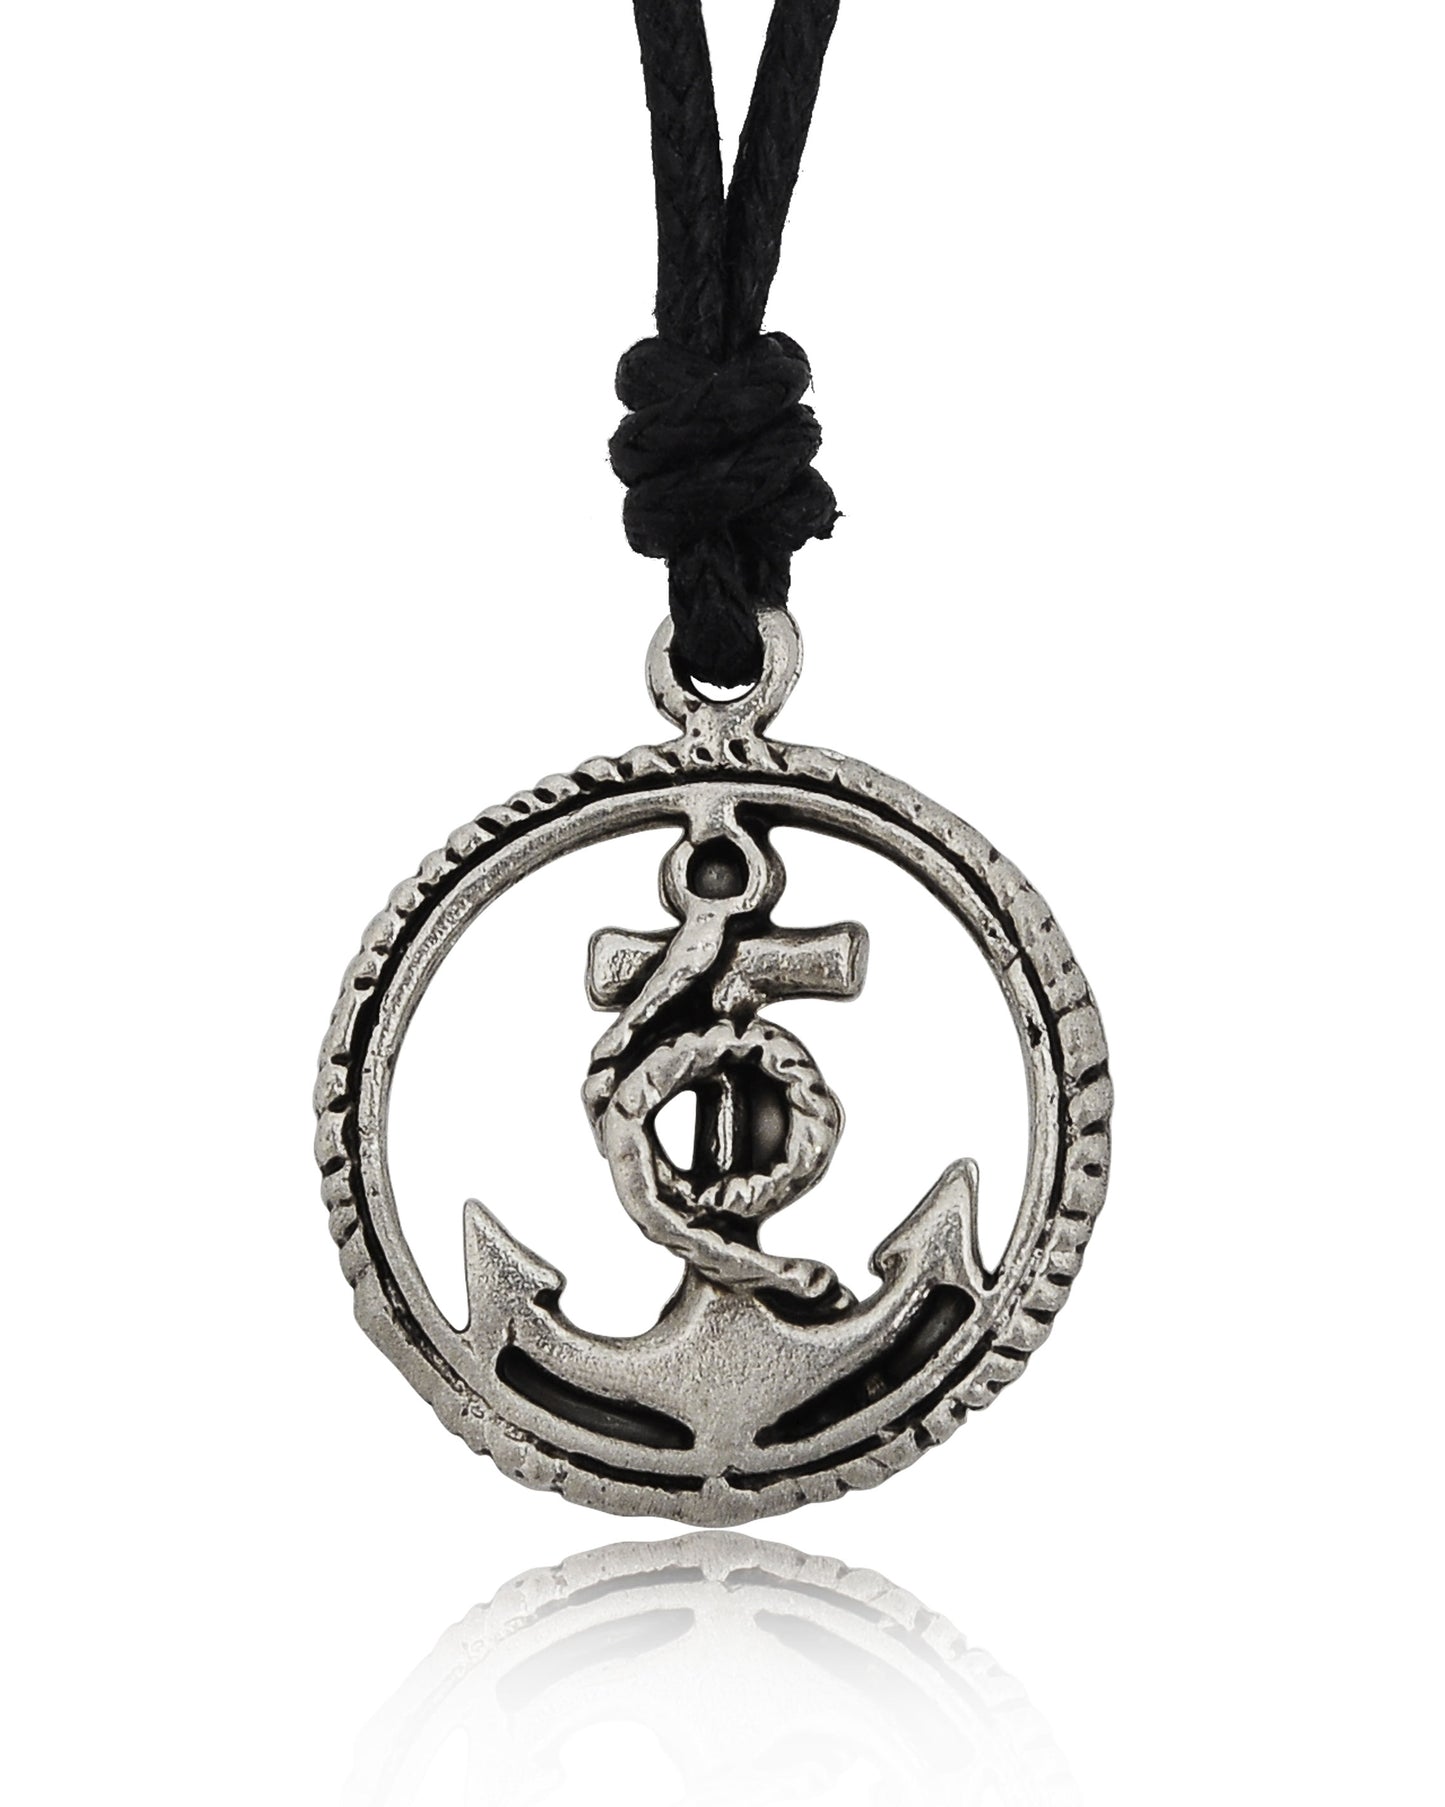 Ship Anchor Boat Pewer Sterling-silver Brass Charm Necklace Pendant Jewelry